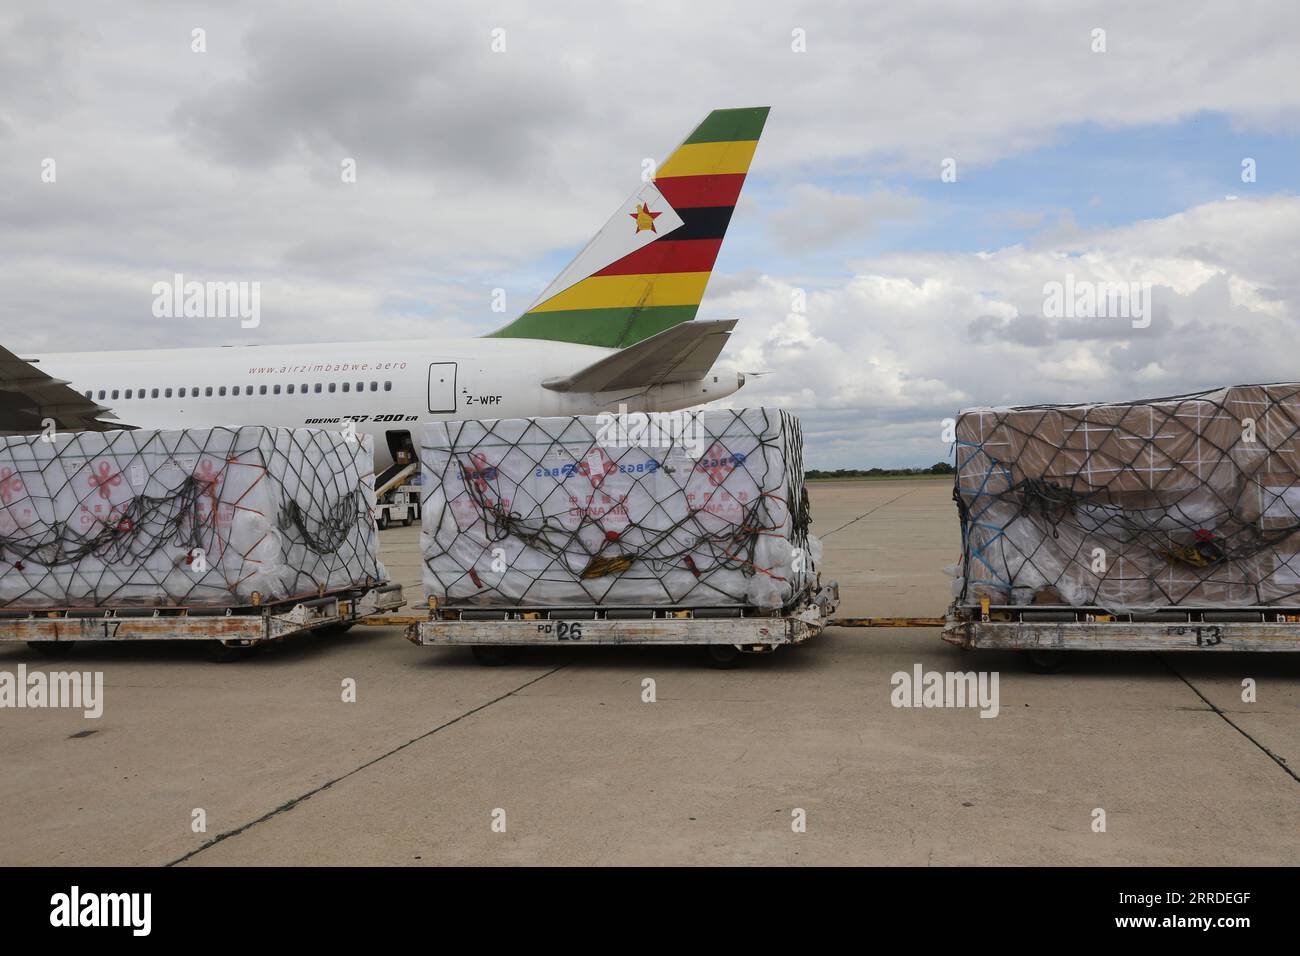 211220 -- HARARE, Dec. 20, 2021 -- A batch of COVID-19 vaccine donated by China arrives at Robert Gabriel Mugabe International Airport in Harare, Zimbabwe, on Dec. 20, 2021. Zimbabwe on Monday received a batch of Sinovac COVID-19 vaccine donated by China, which will boost the country s vaccination campaign as it battles the fourth wave of COVID-19 pandemic.  ZIMBABWE-HARARE-CHINA-COVID-19 VACCINE-MEDICAL SUPPLIES-DONATION ZhangxYuliang PUBLICATIONxNOTxINxCHN Stock Photo